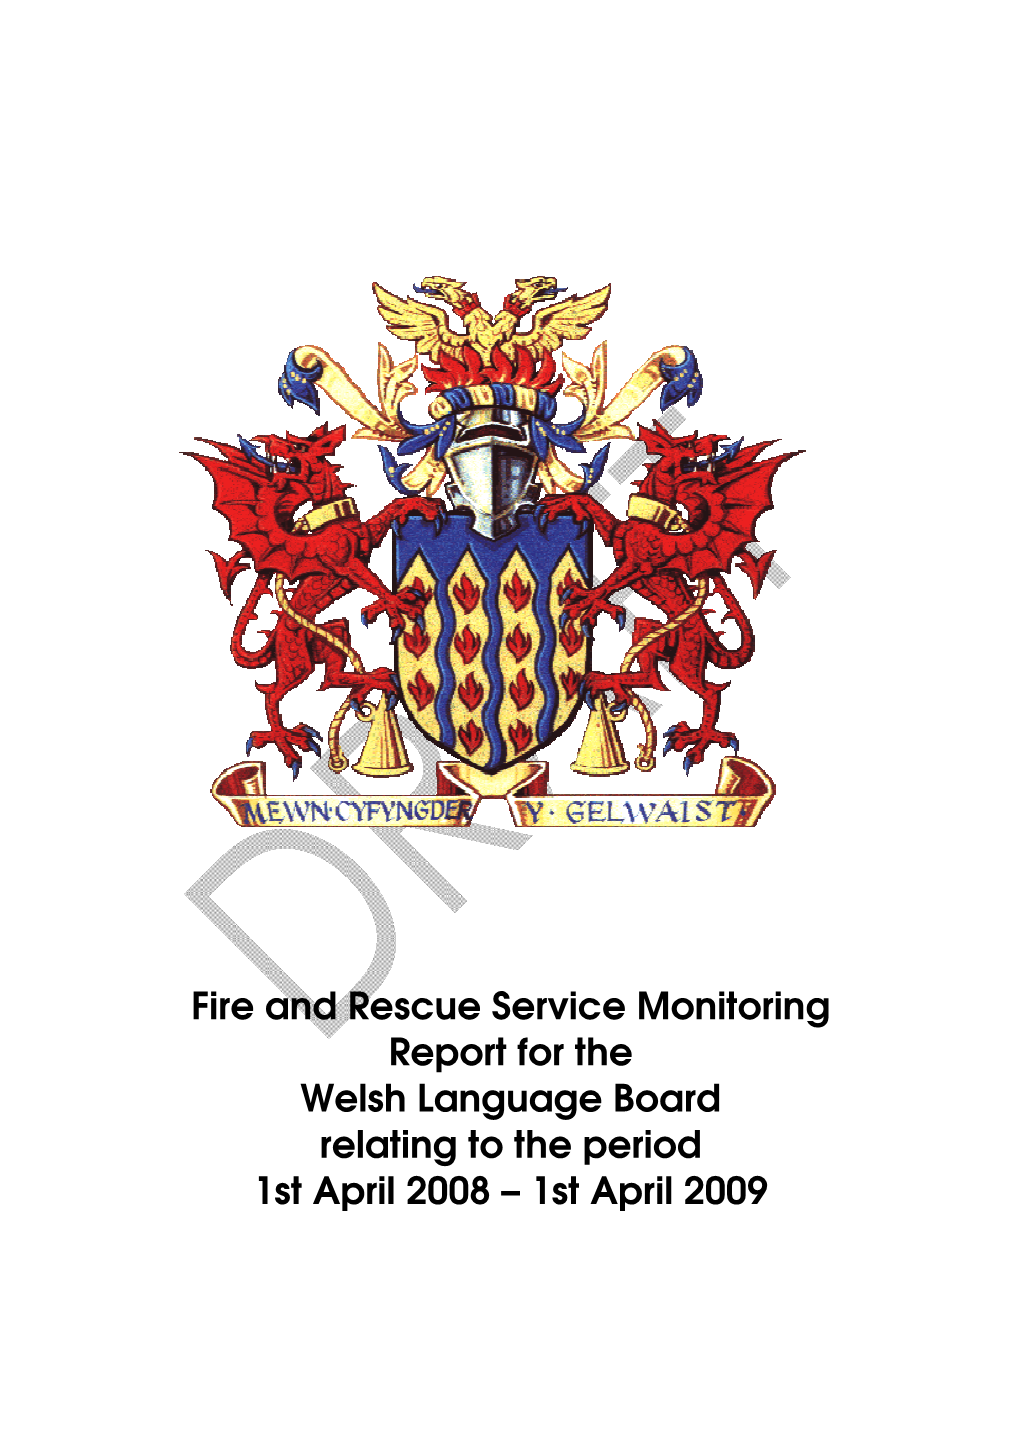 Fire and Rescue Service Monitoring Report for the Welsh Language Board Relating to the Period 1St April 2008 – 1St April 2009